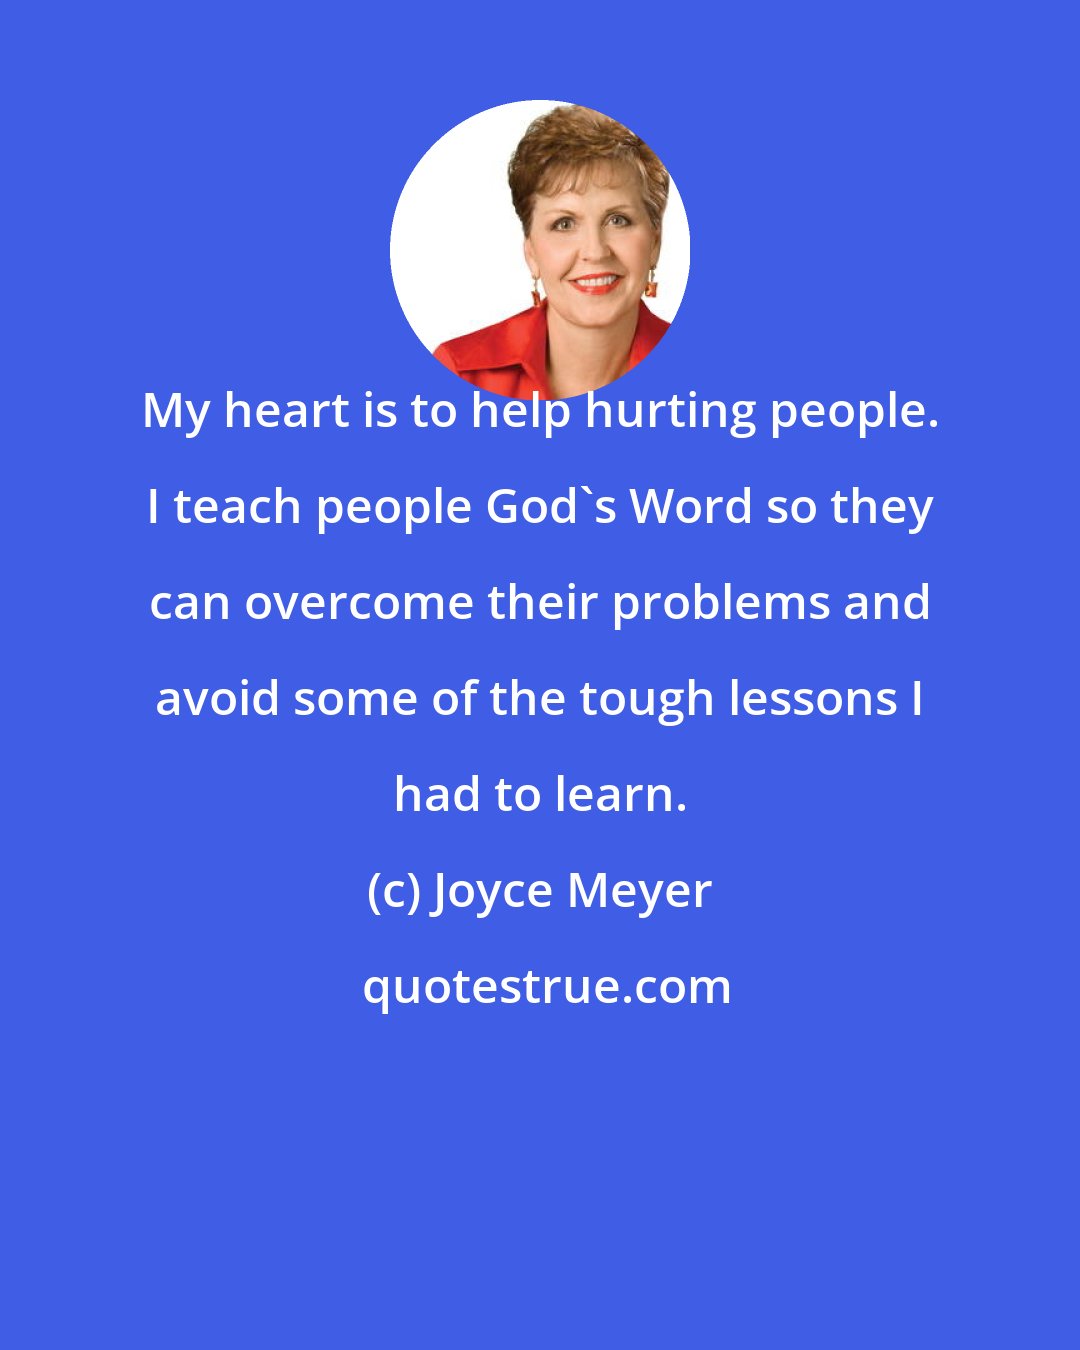 Joyce Meyer: My heart is to help hurting people. I teach people God's Word so they can overcome their problems and avoid some of the tough lessons I had to learn.